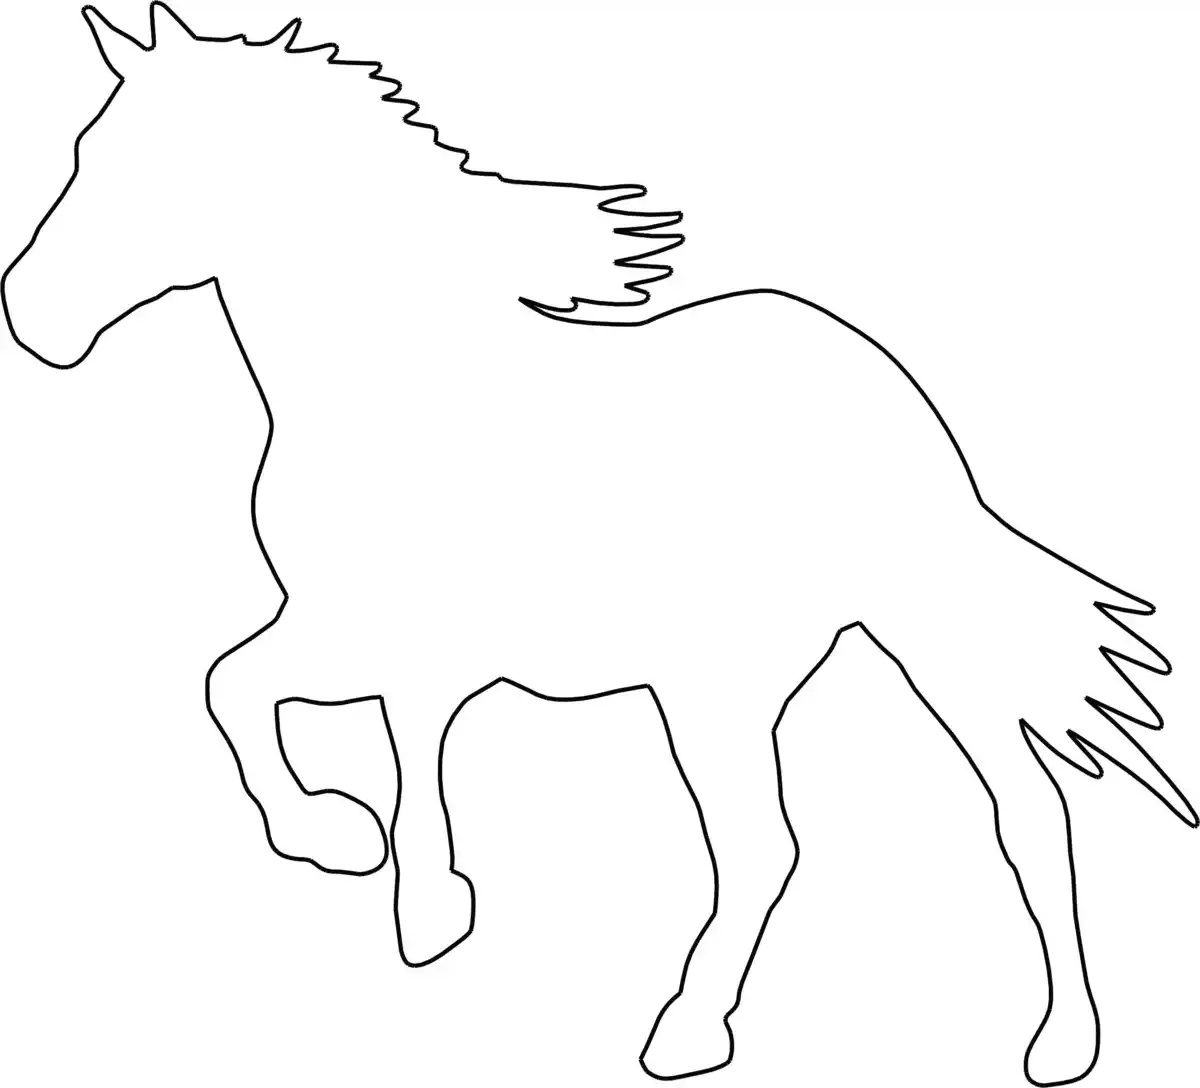 Free Download Coloring PDF, Horse Running Kids Coloring Pages Pdf